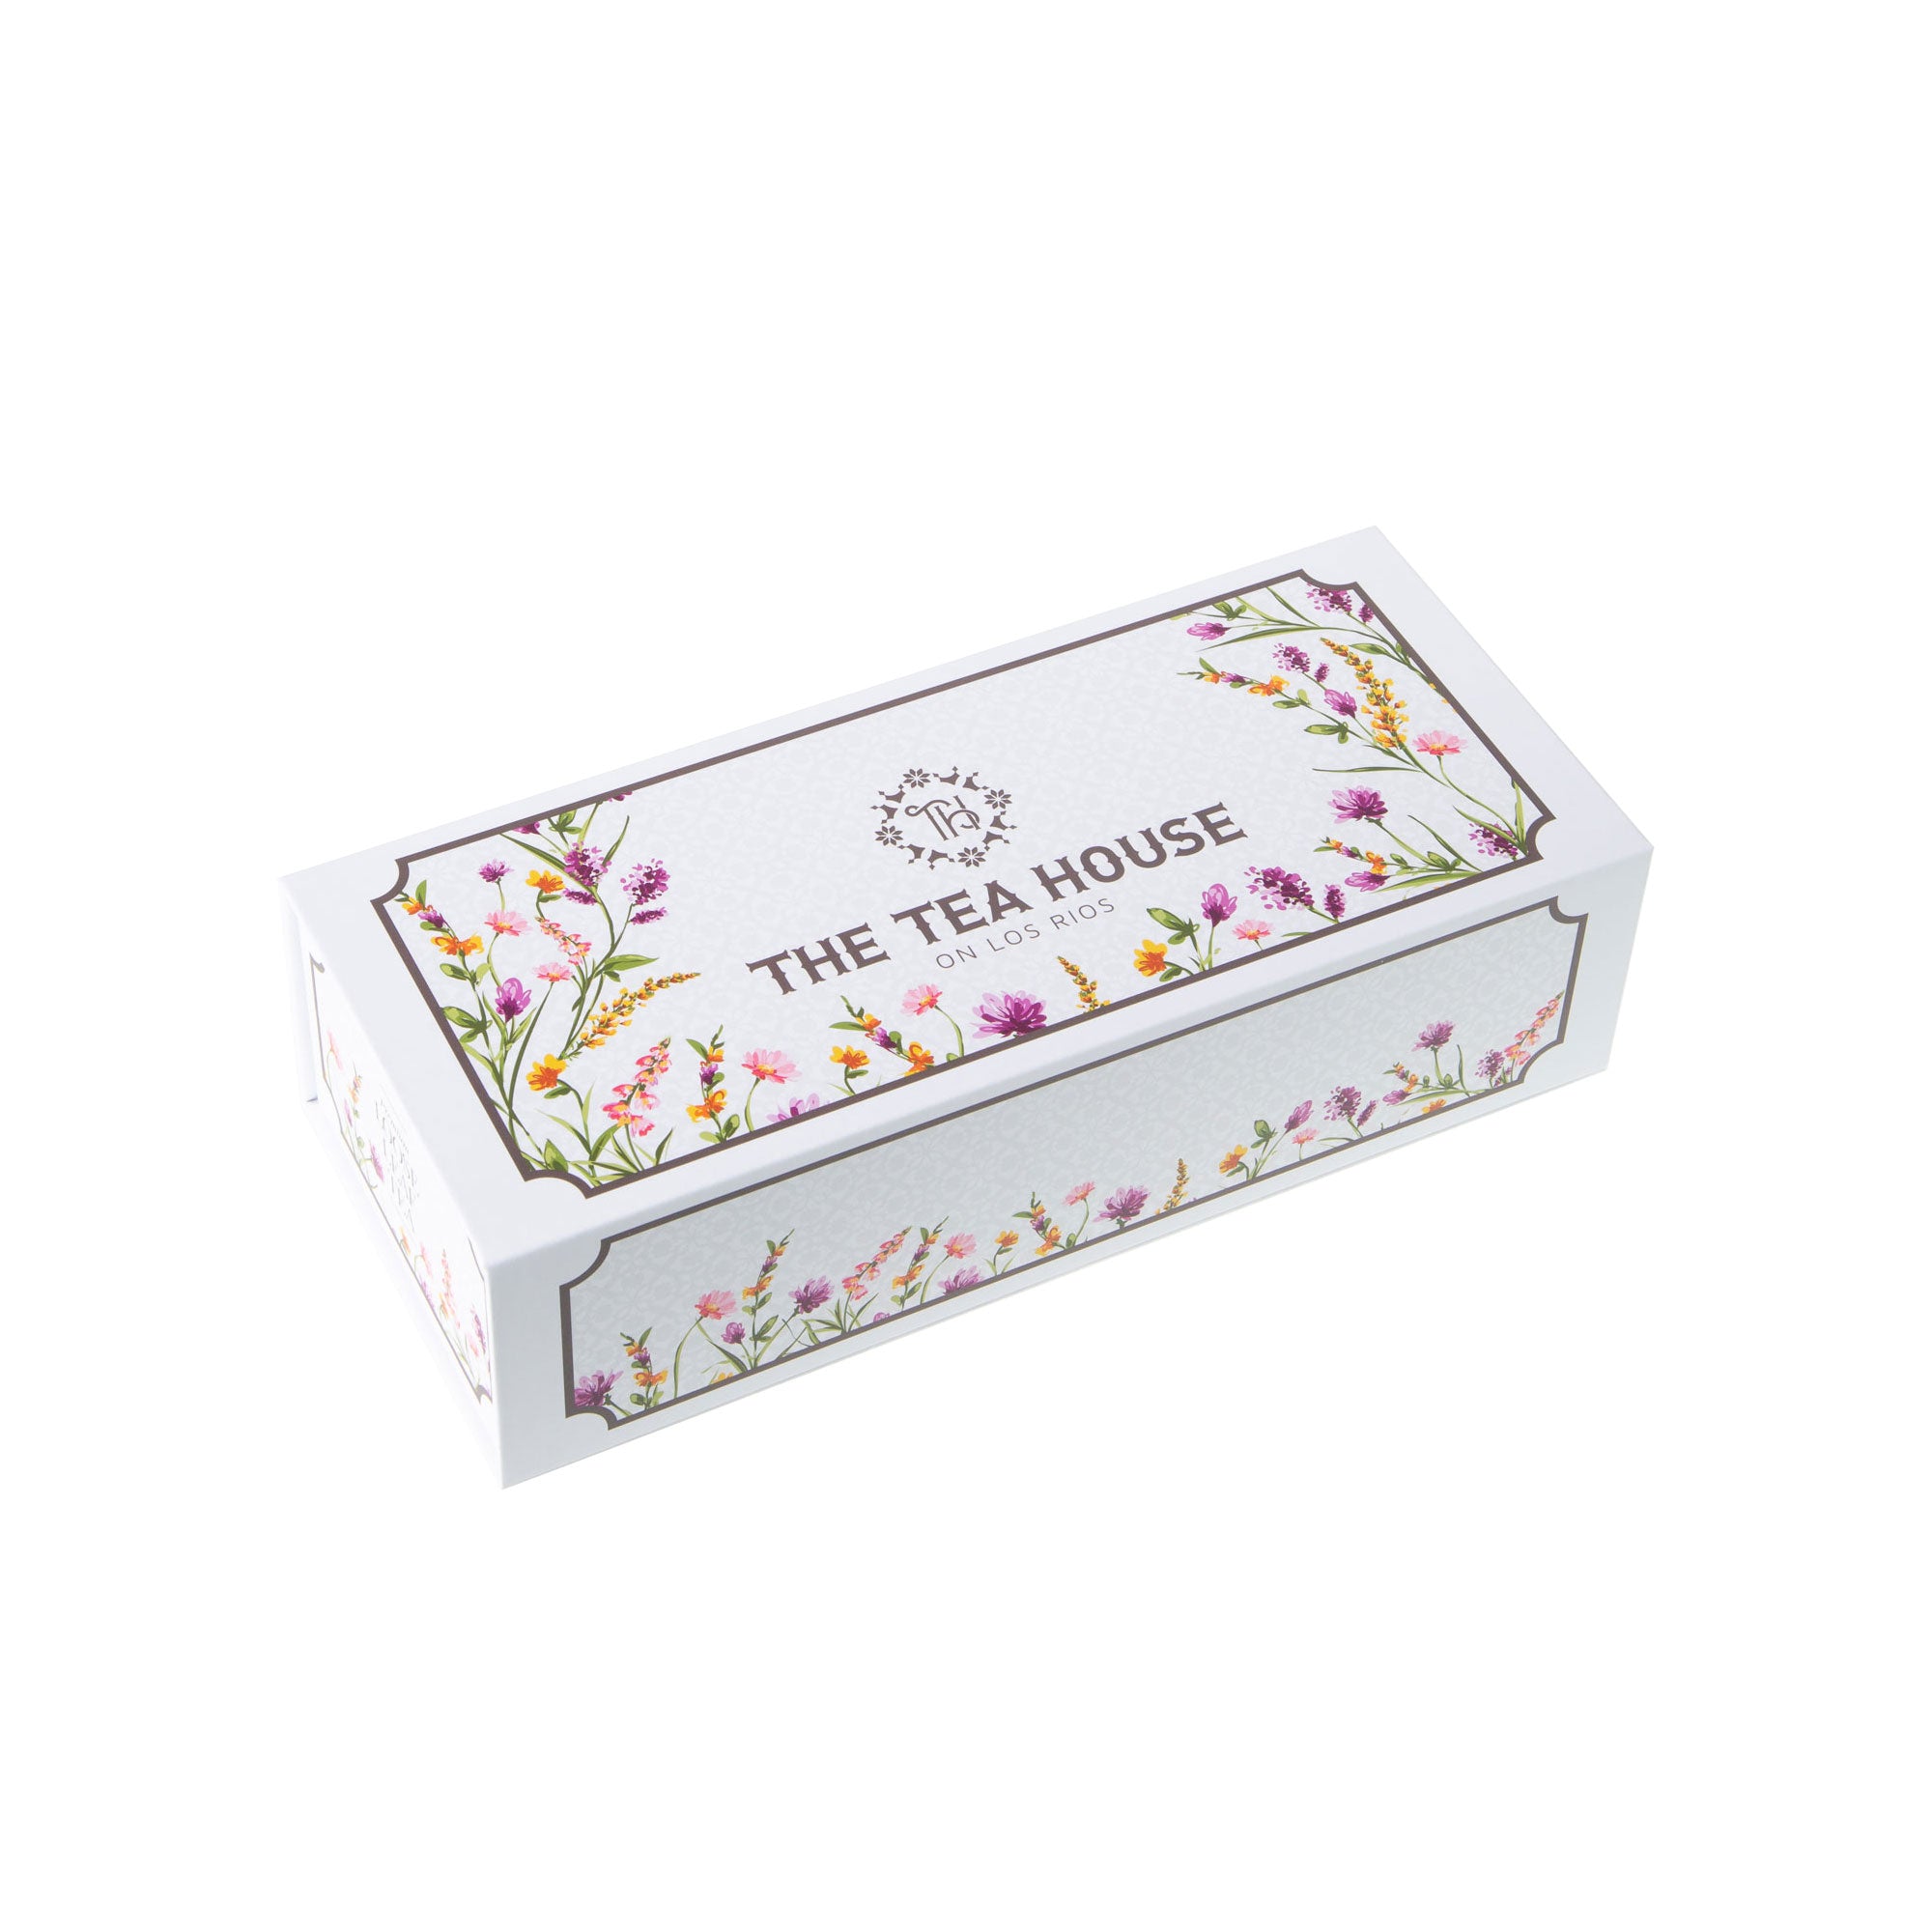 The Tea House Gift Box - Best Sellers